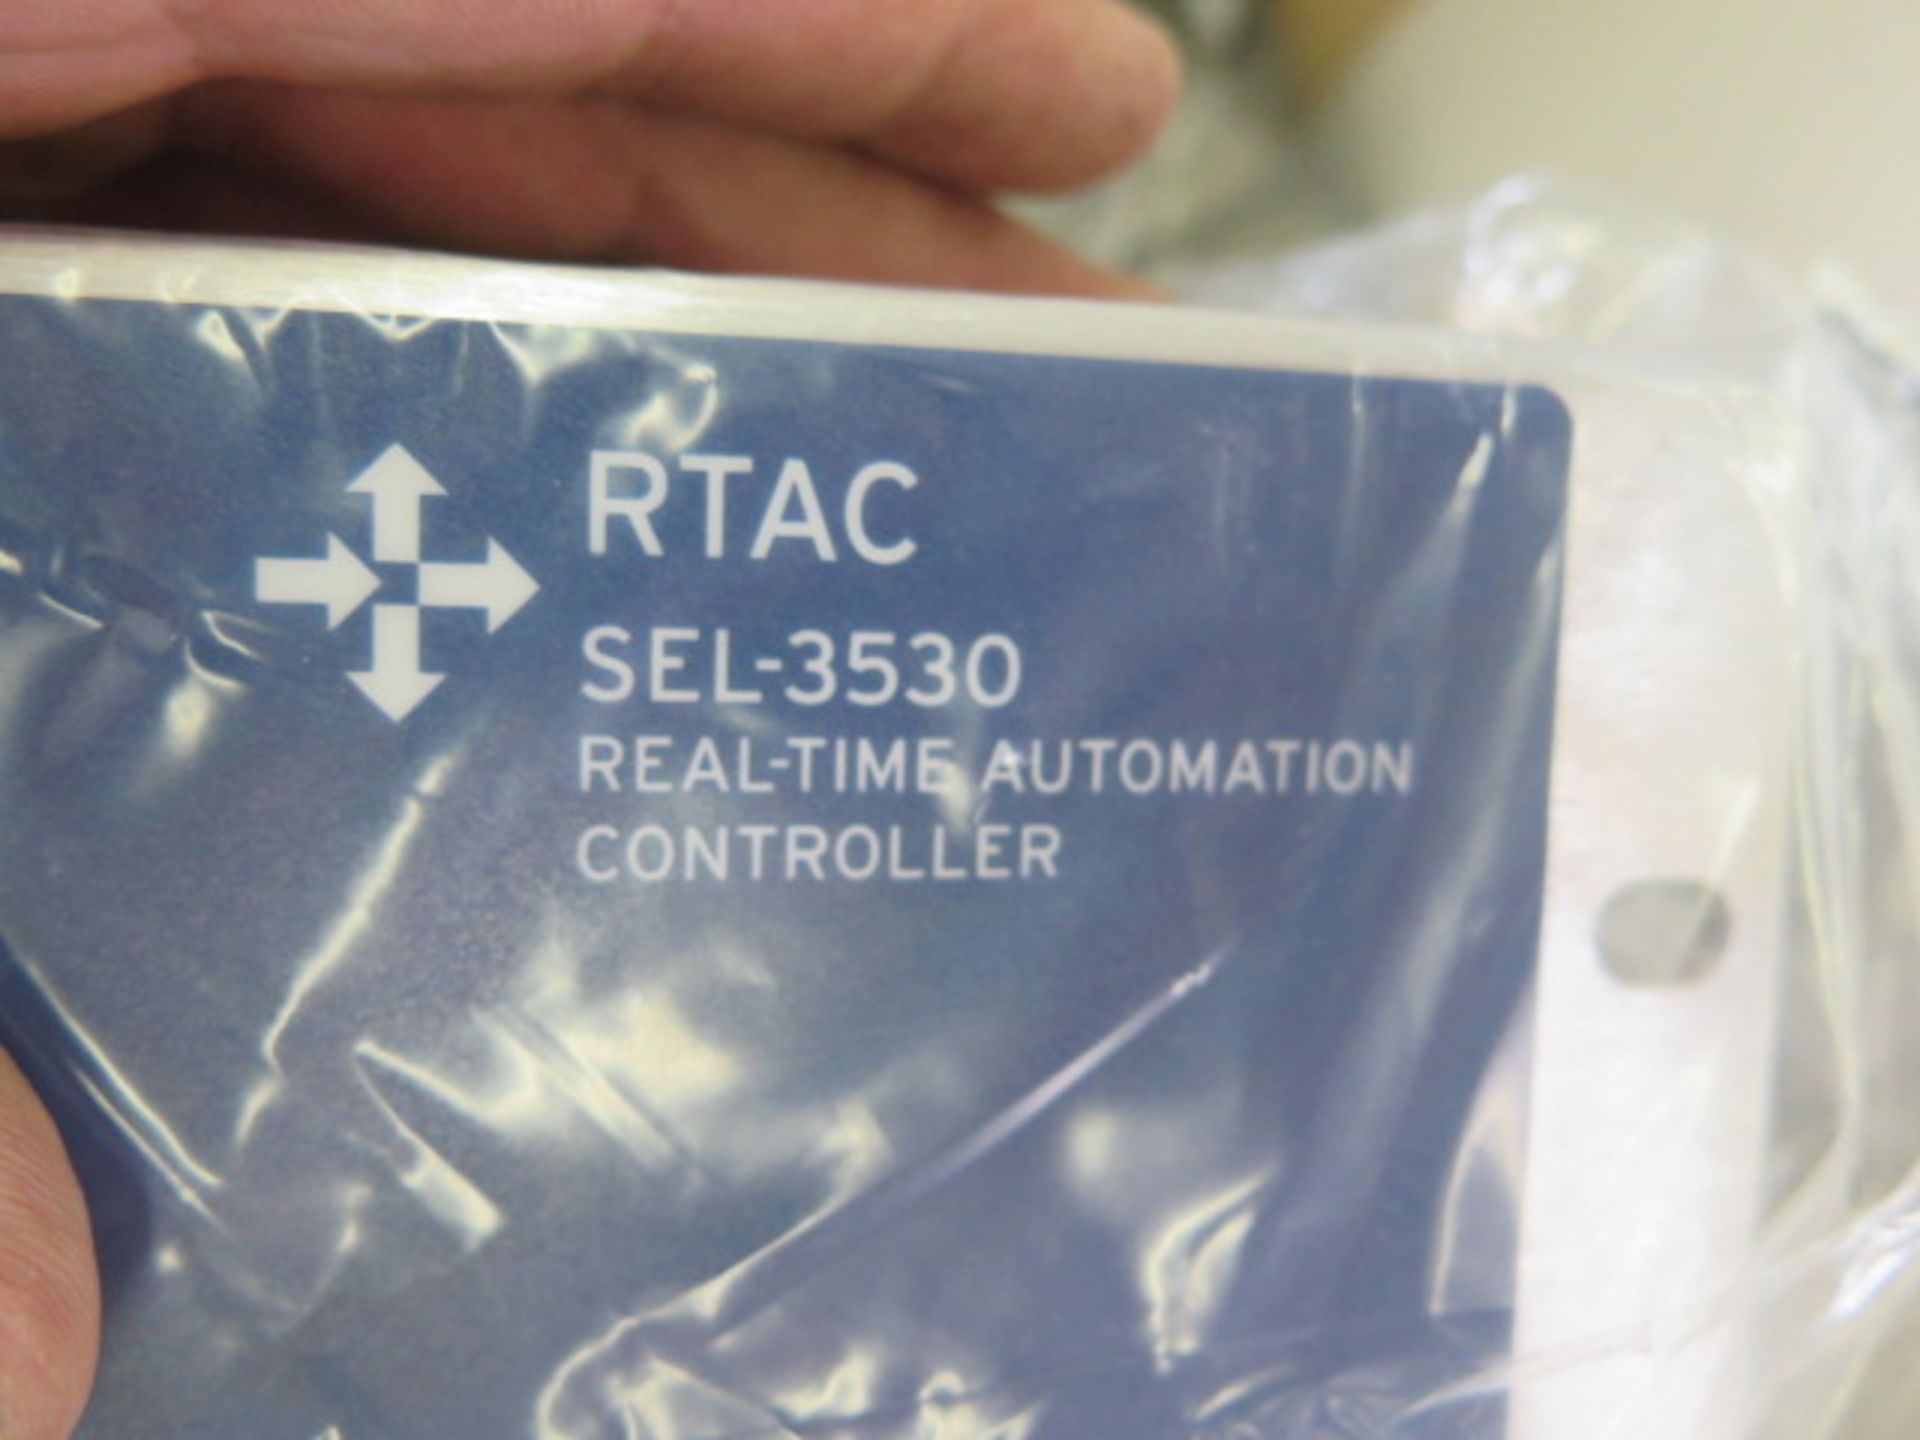 Schweitzer Engineering Laboratories mdl. RTAC SEL-3530 Real Time Automation Controller - Image 3 of 3